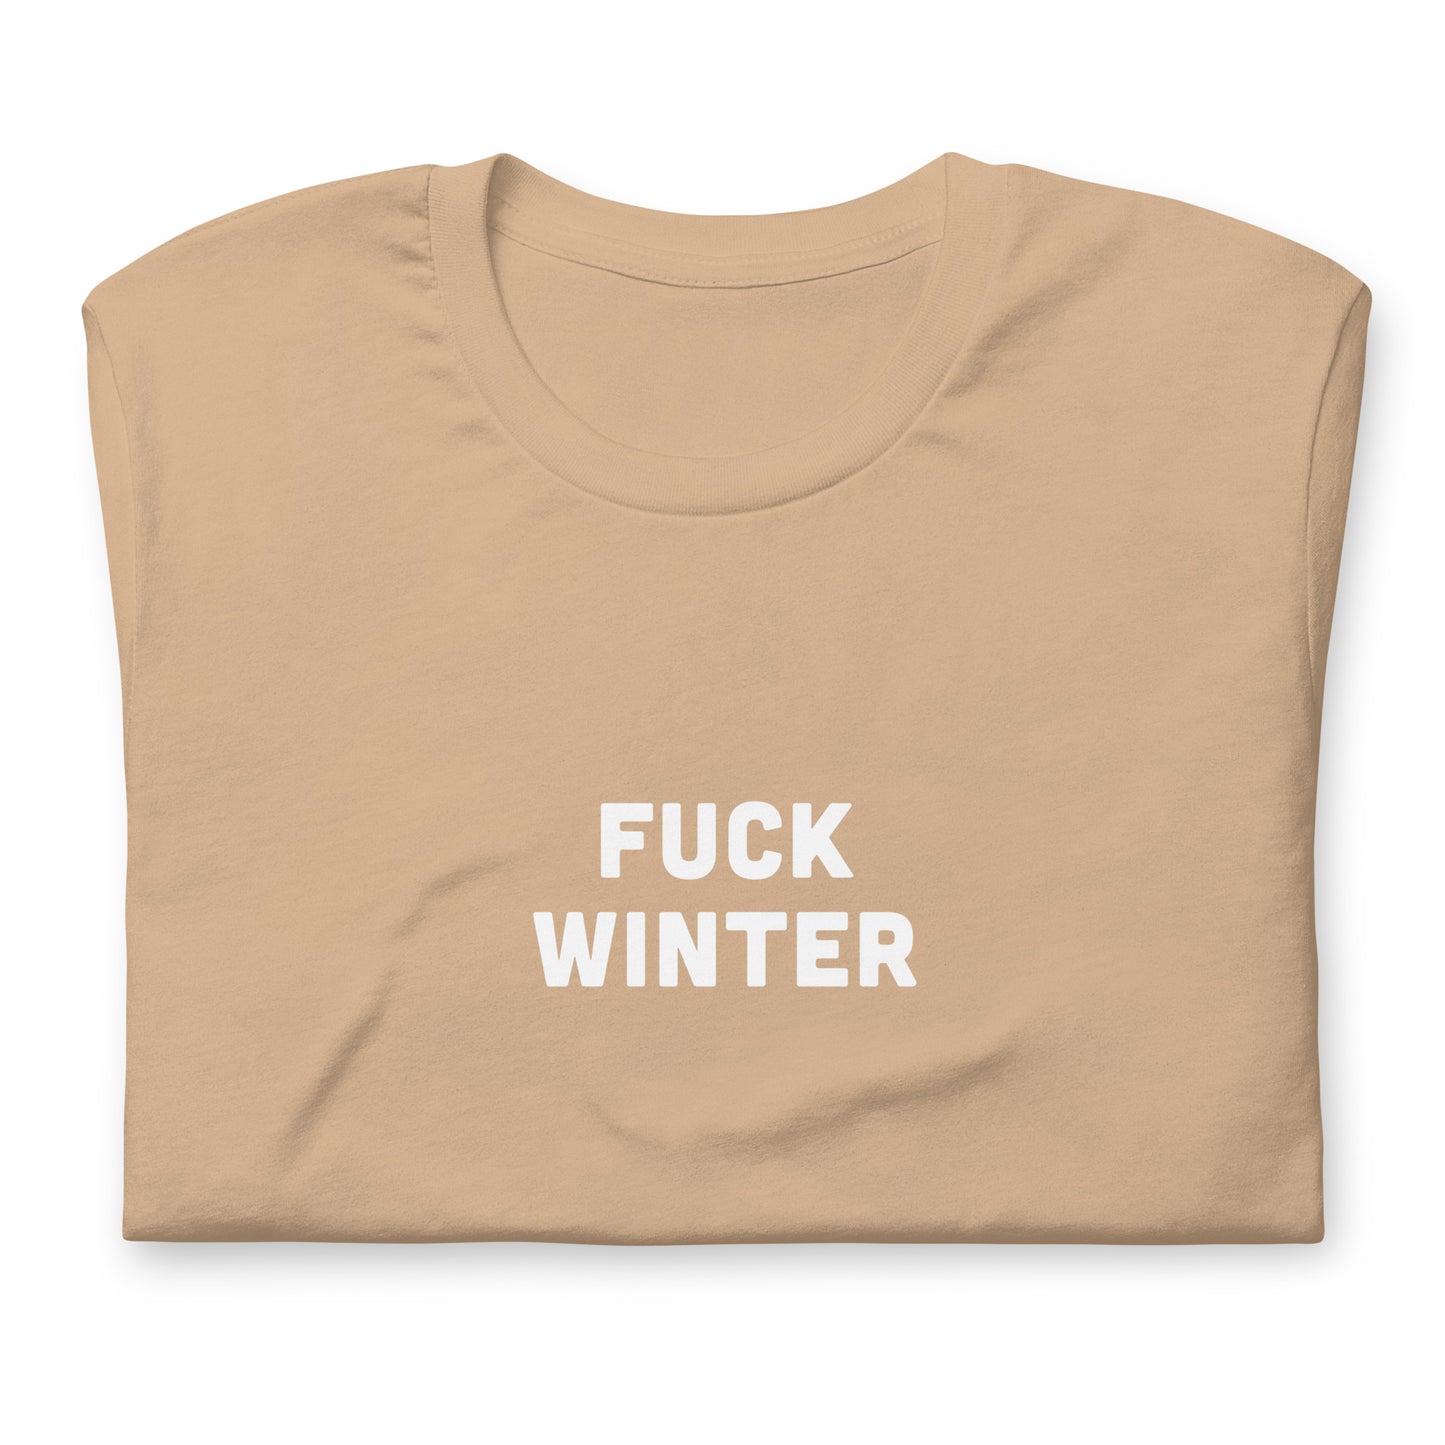 Fuck Winter T-Shirt Size 2XL Color Forest